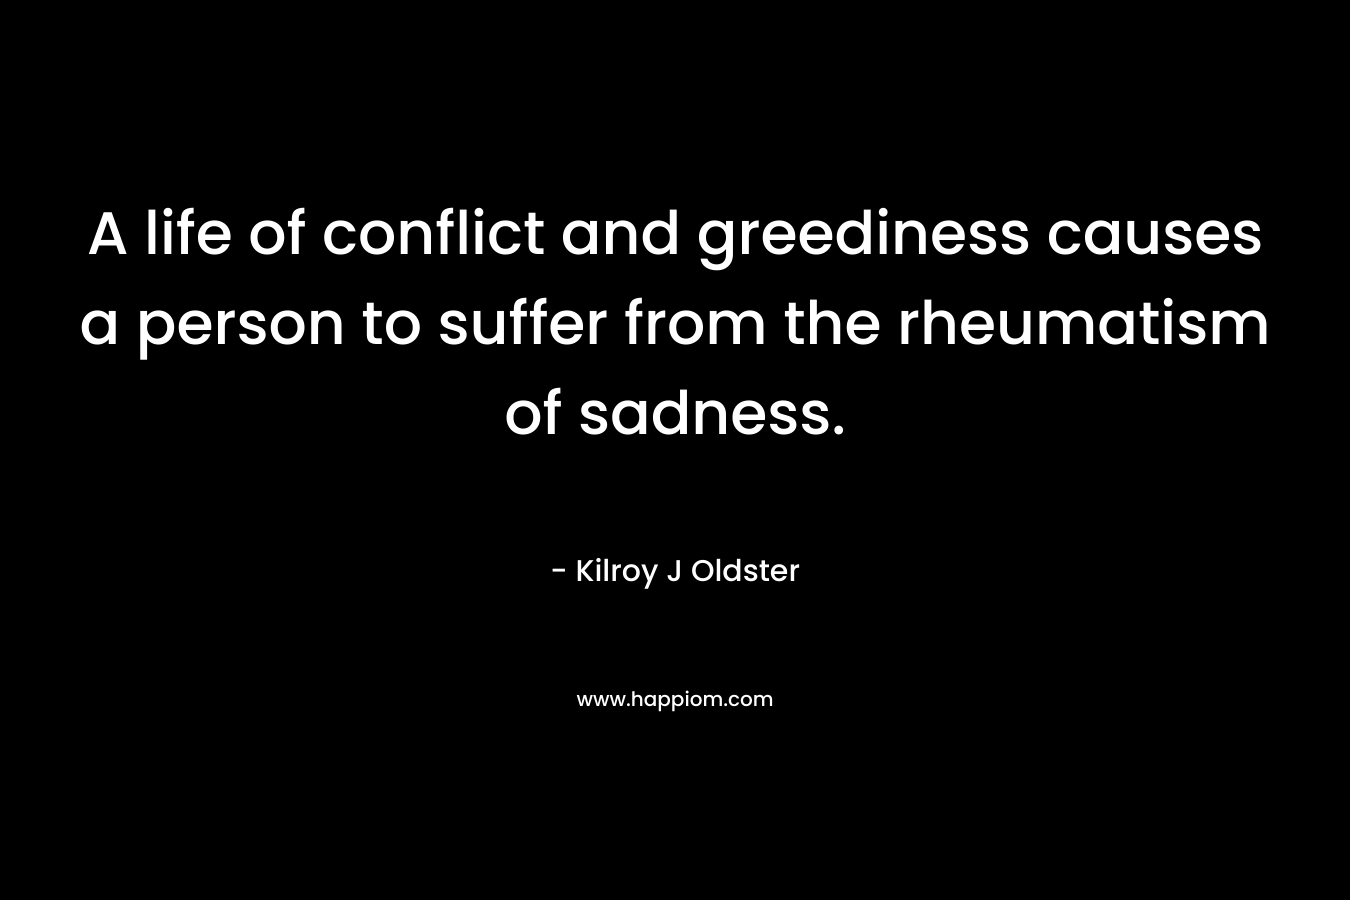 A life of conflict and greediness causes a person to suffer from the rheumatism of sadness. – Kilroy J Oldster